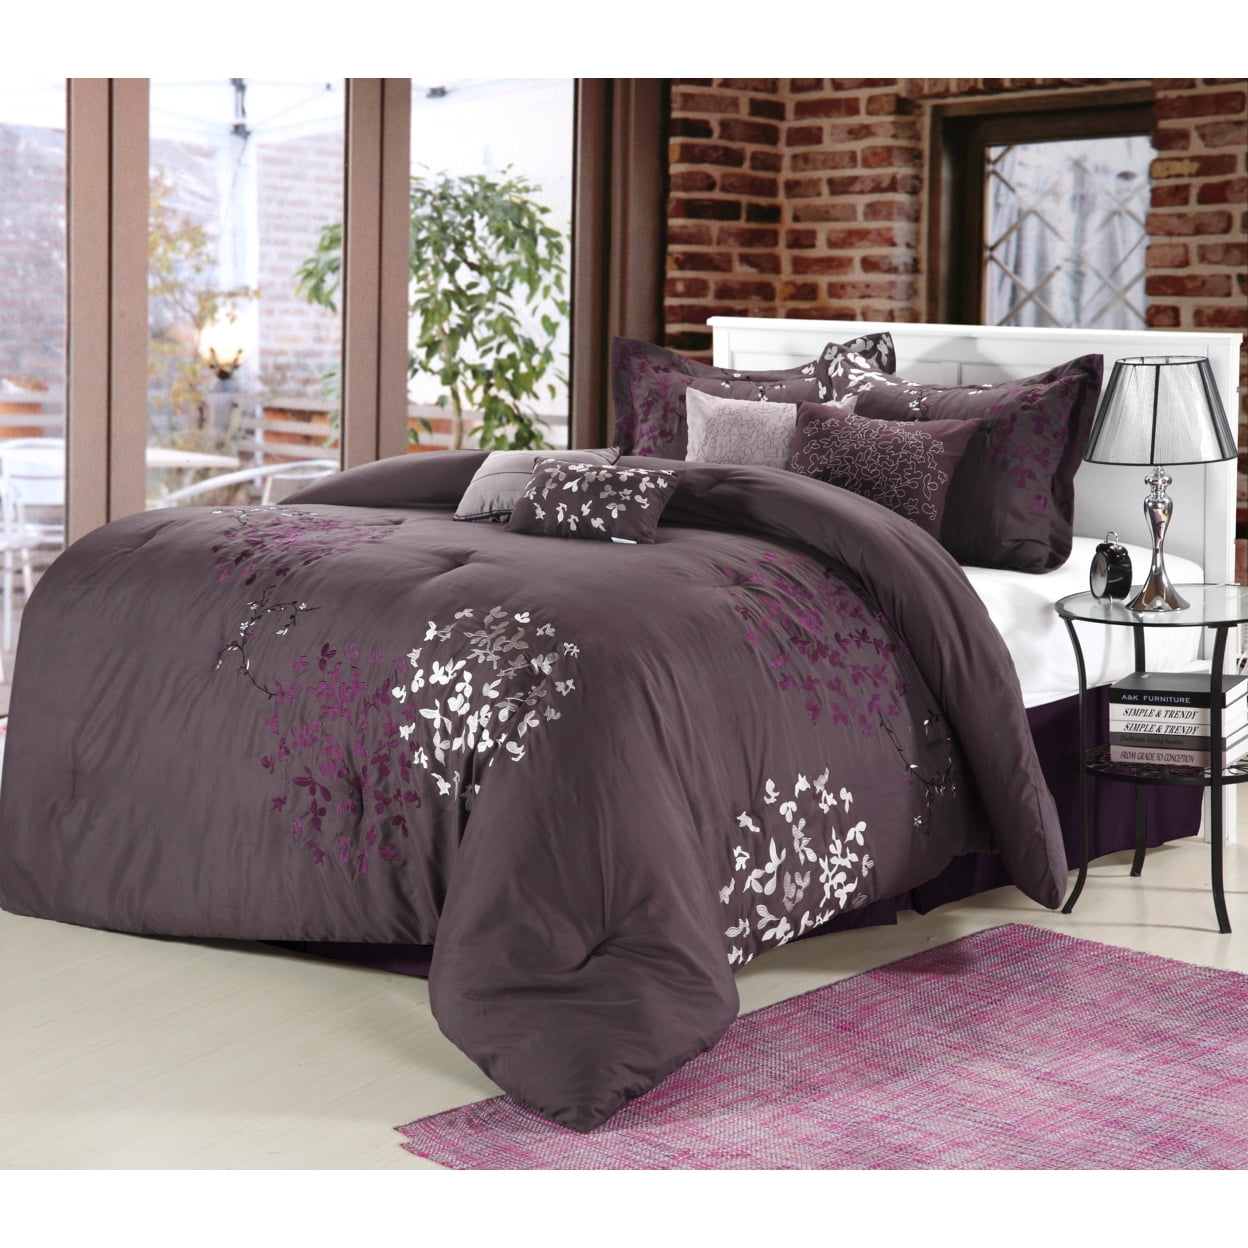 Cheila Embroidered Comforter Set - Plum - King - 8 Piece